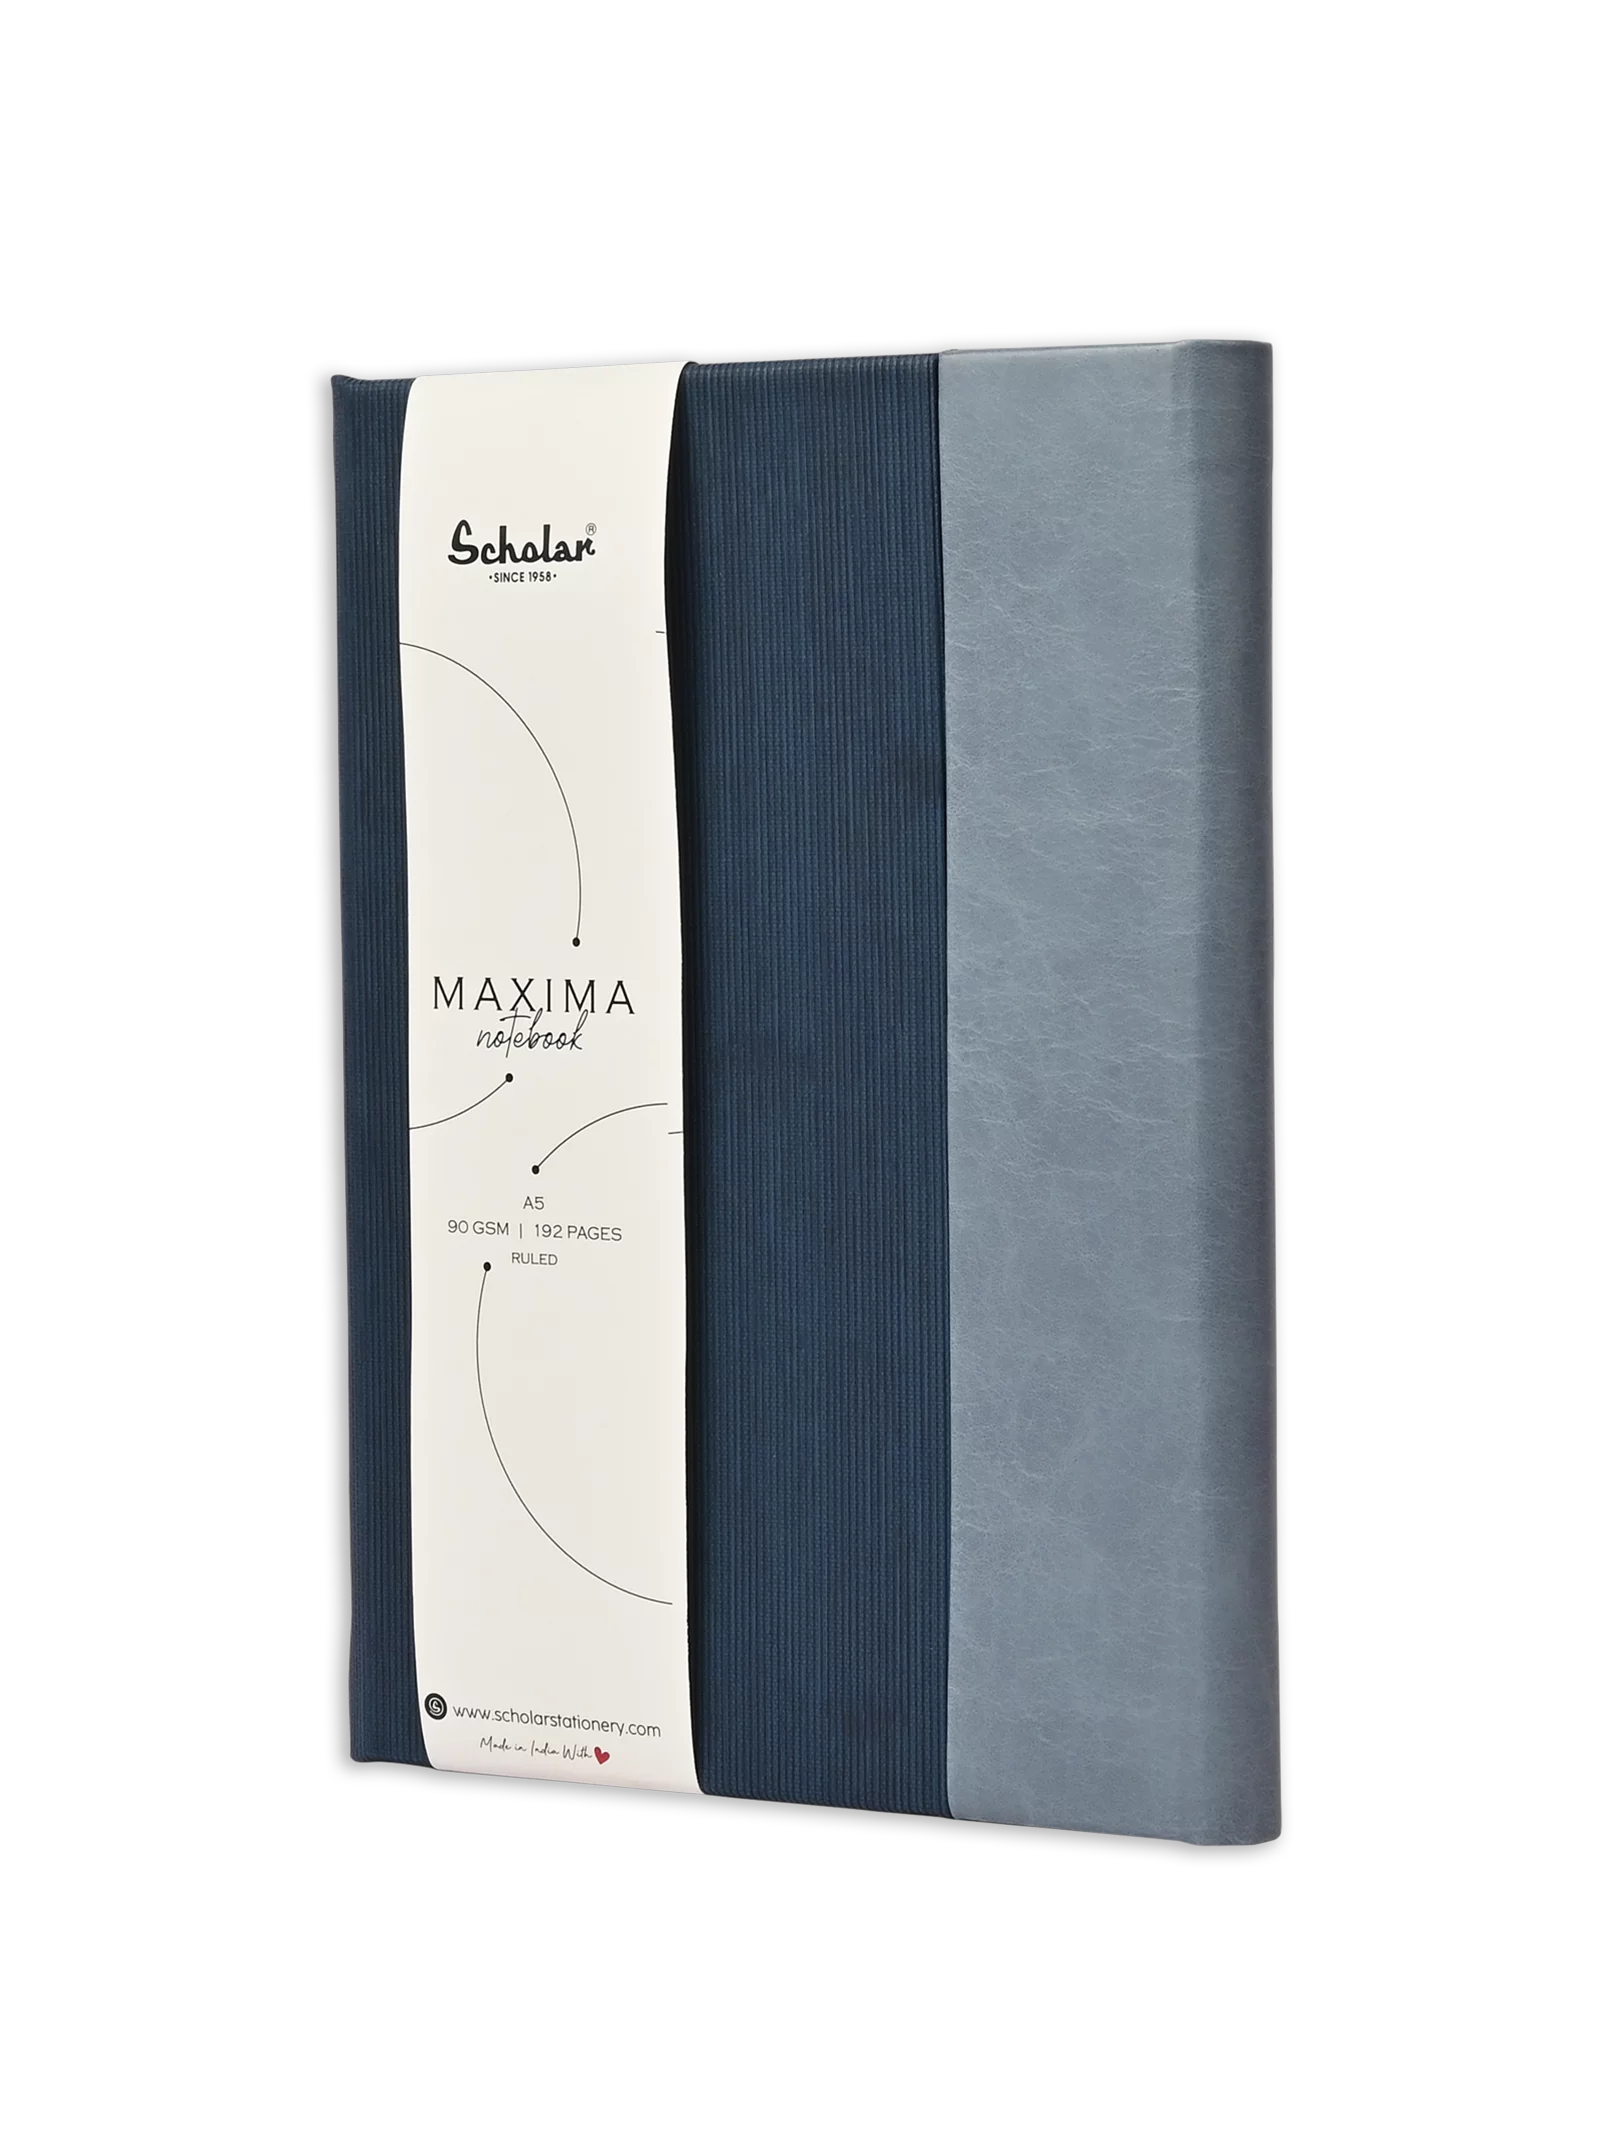 SCHOLAR, Notebook - Maxima | A5 | 192 Pages | 90 gsm.